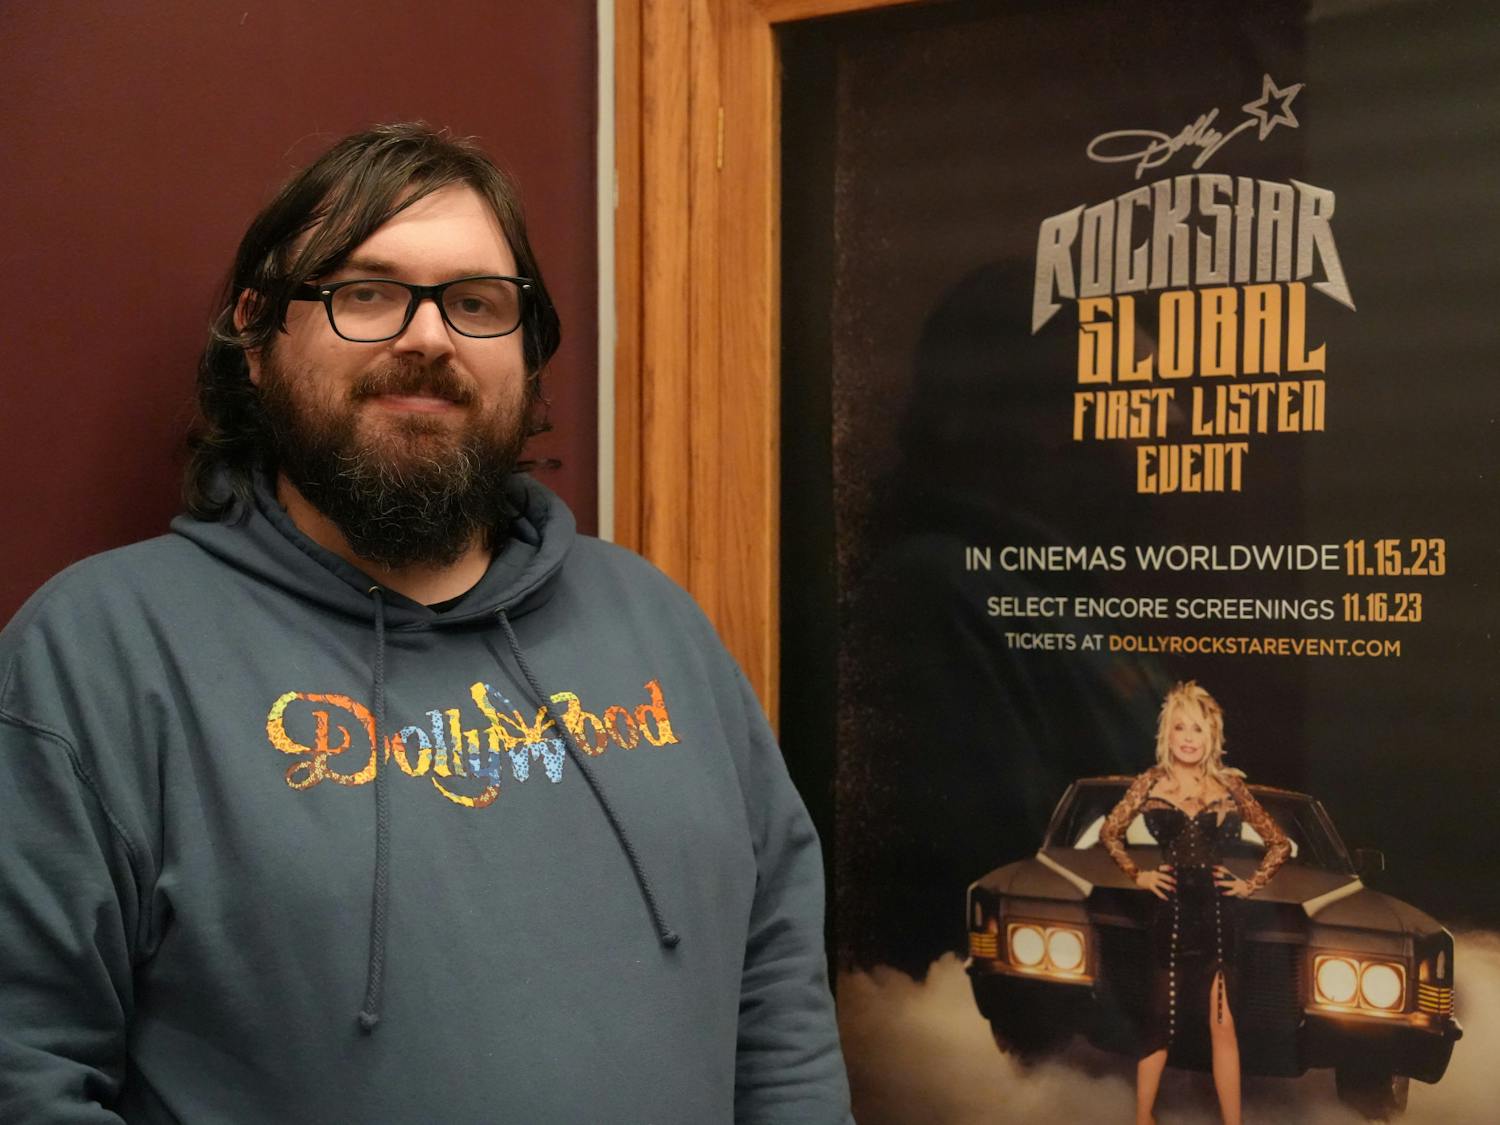 Matt Dibble, 33-year-old Hippodrome Theatre box office worker, sported his new Dollywood sweatshirt as he welcomed excited guests to the premiere Nov. 15, 2023 at The Hippodrome Theatre in Gainesville, Fla.